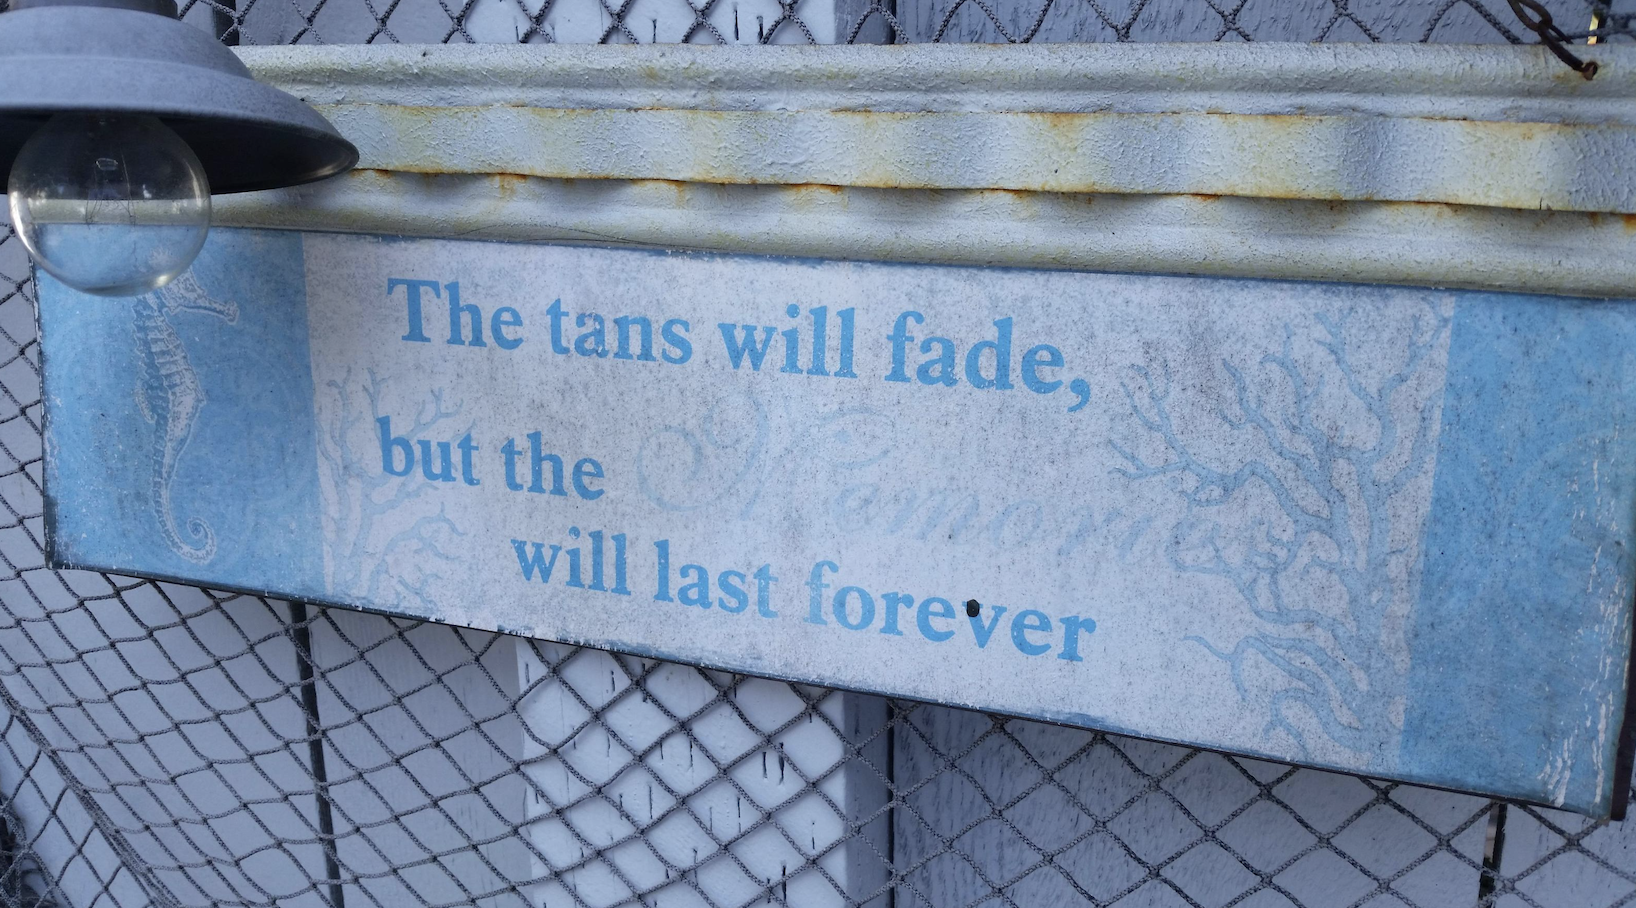 Irony - The tans will fade, but the will last forever